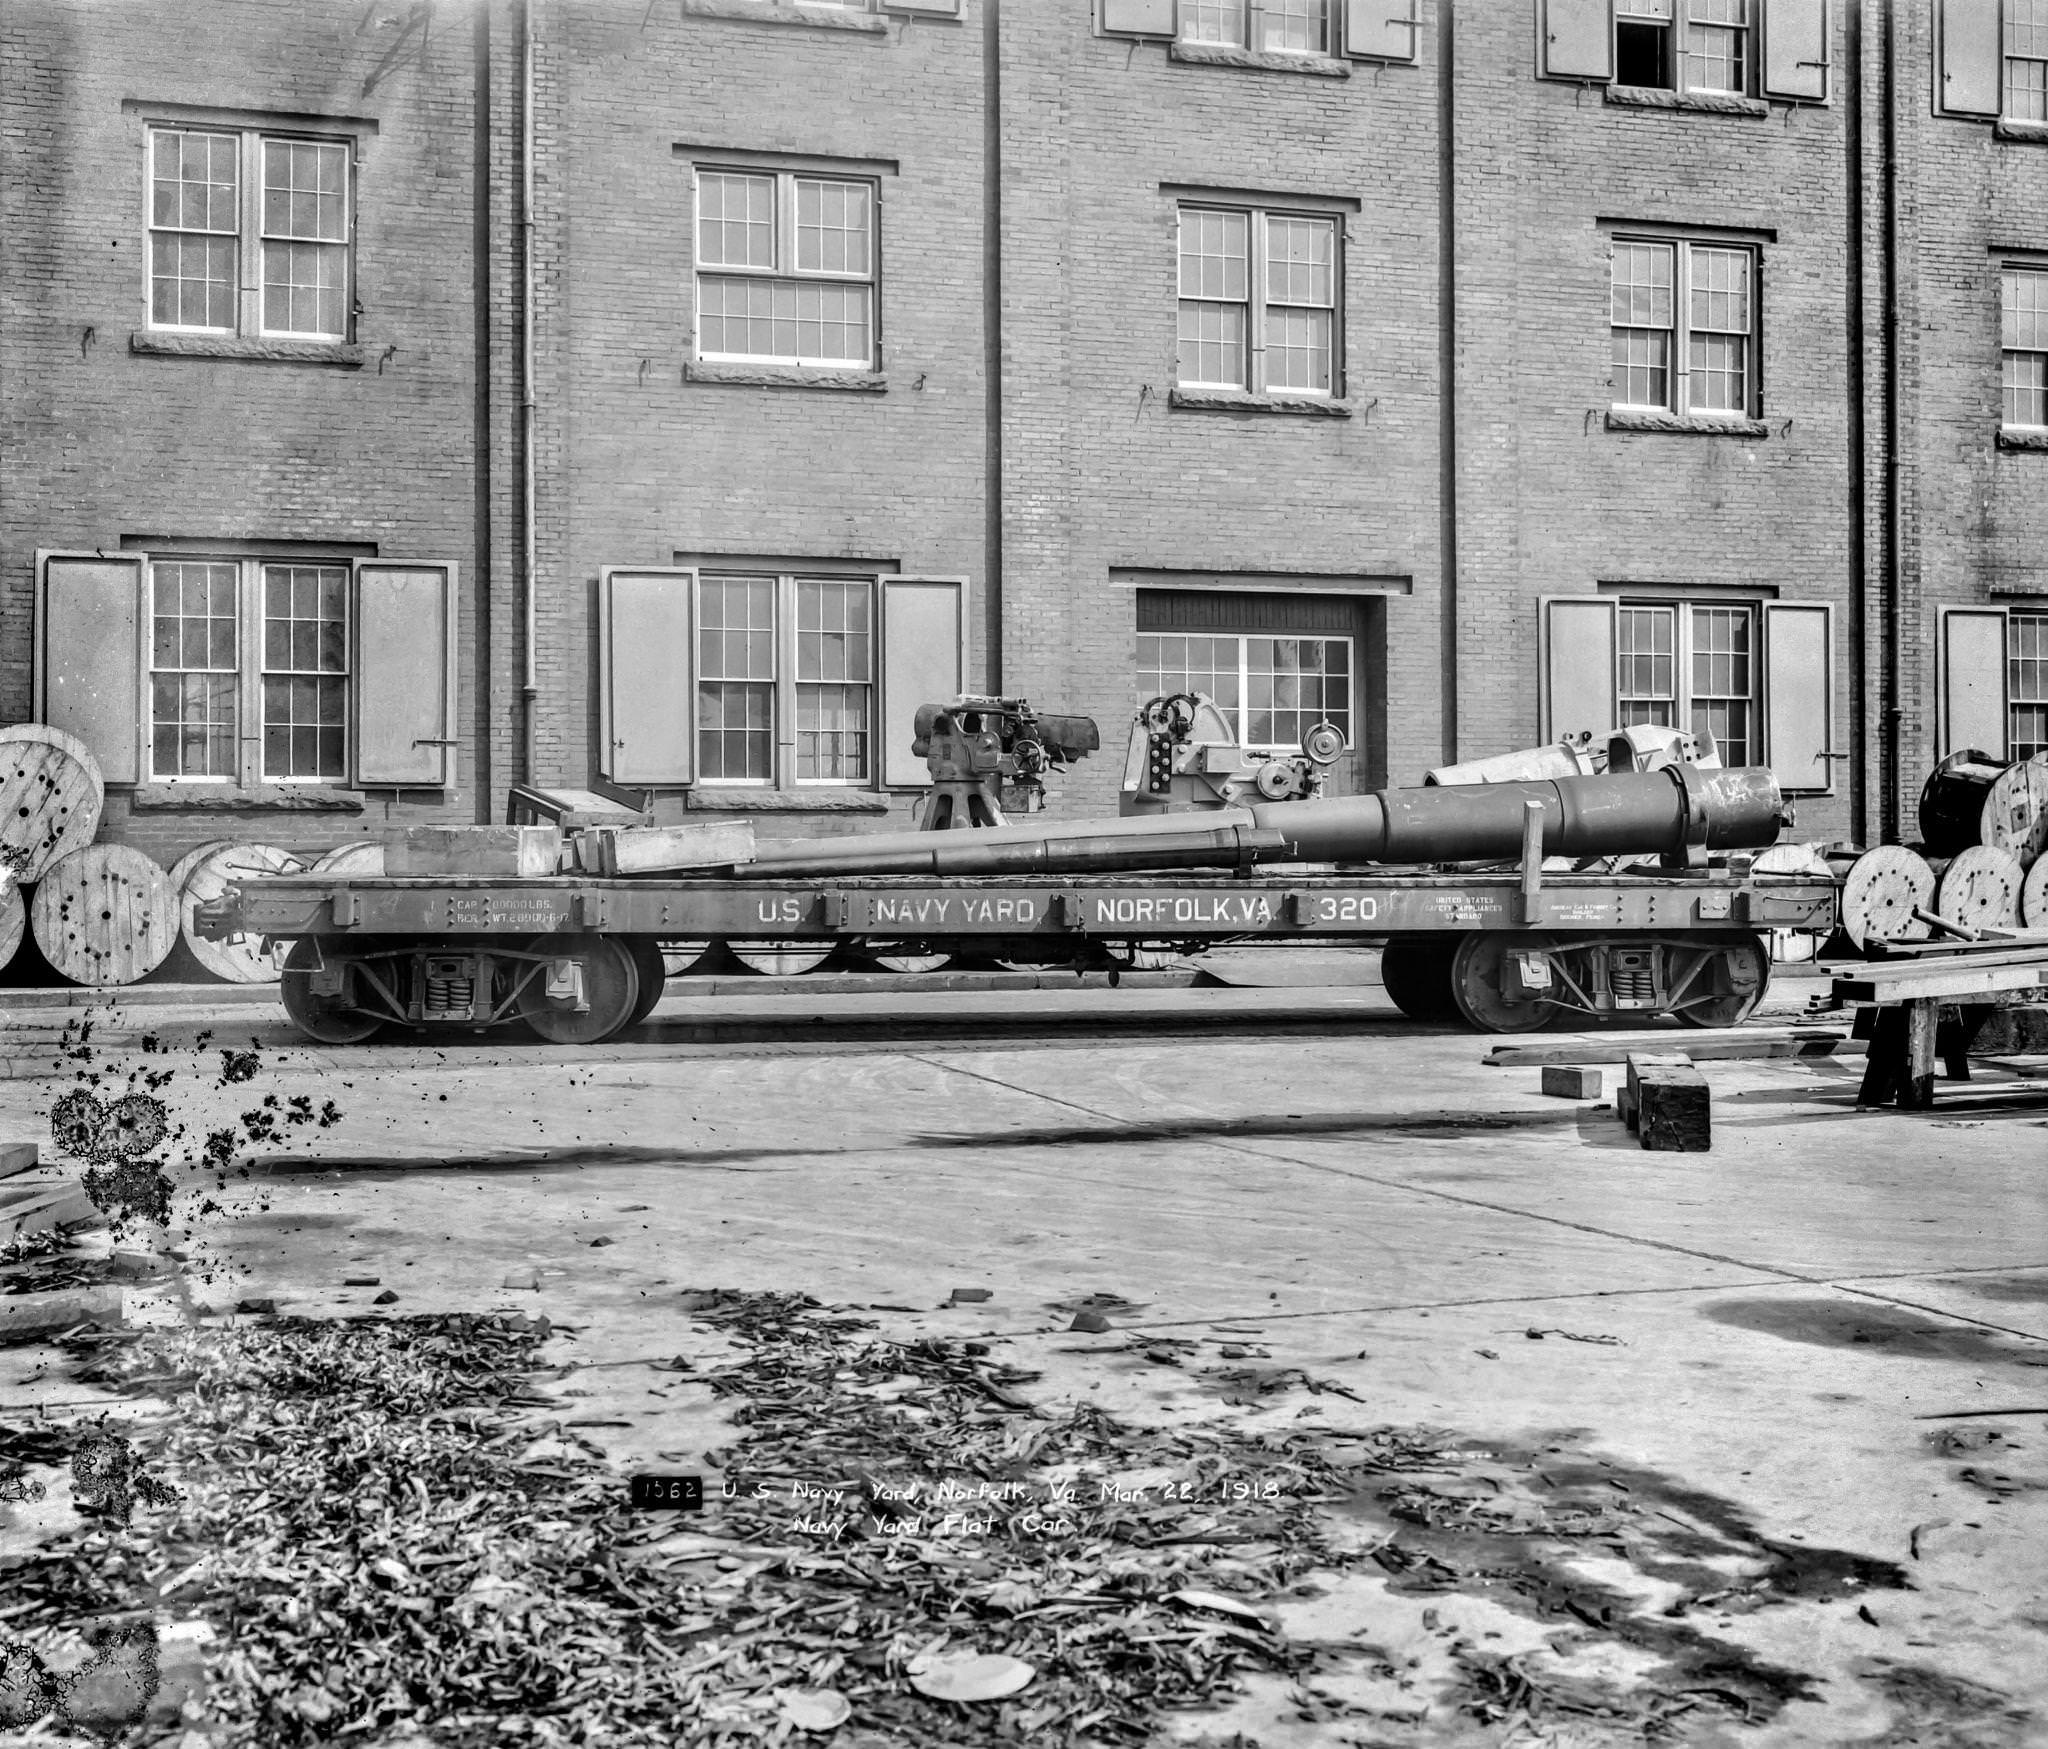 Navy Yard in Norfolk Virginia of a flat car with what looks like a large gun (barrel for a battleship) on top, 1918